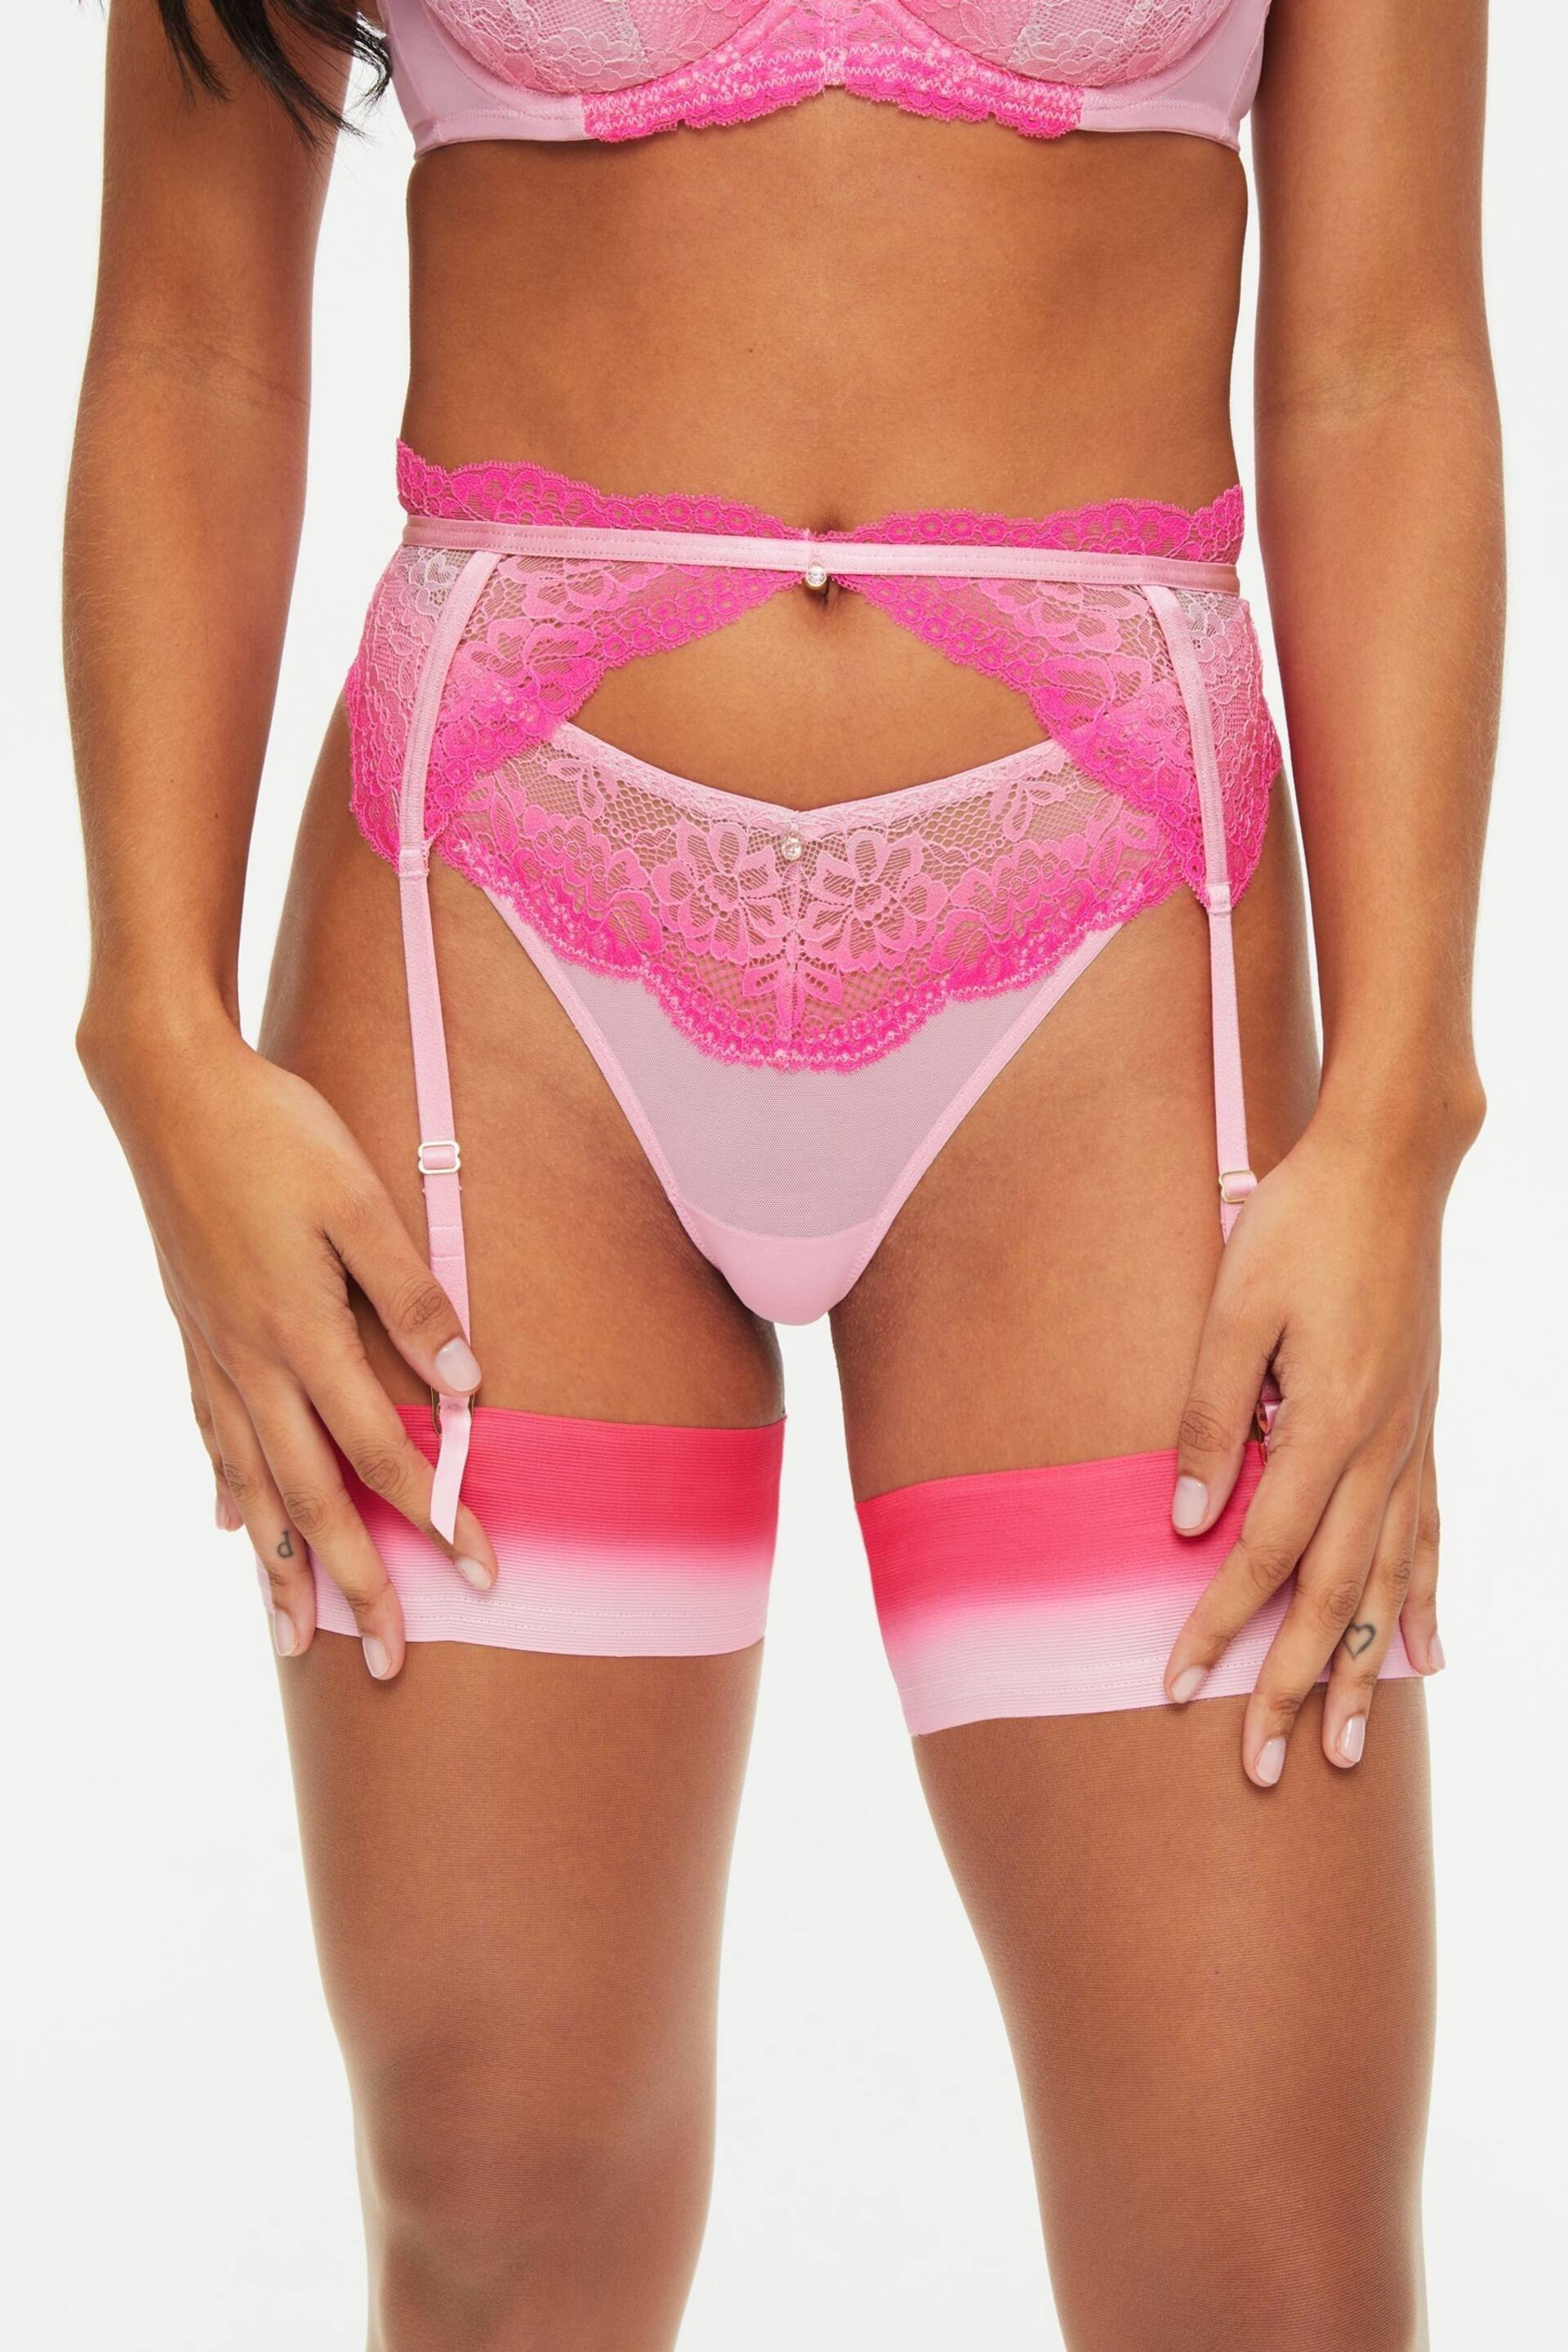 Ann Summers Sexy Lace Planet Suspender Belt - Image 1 of 4